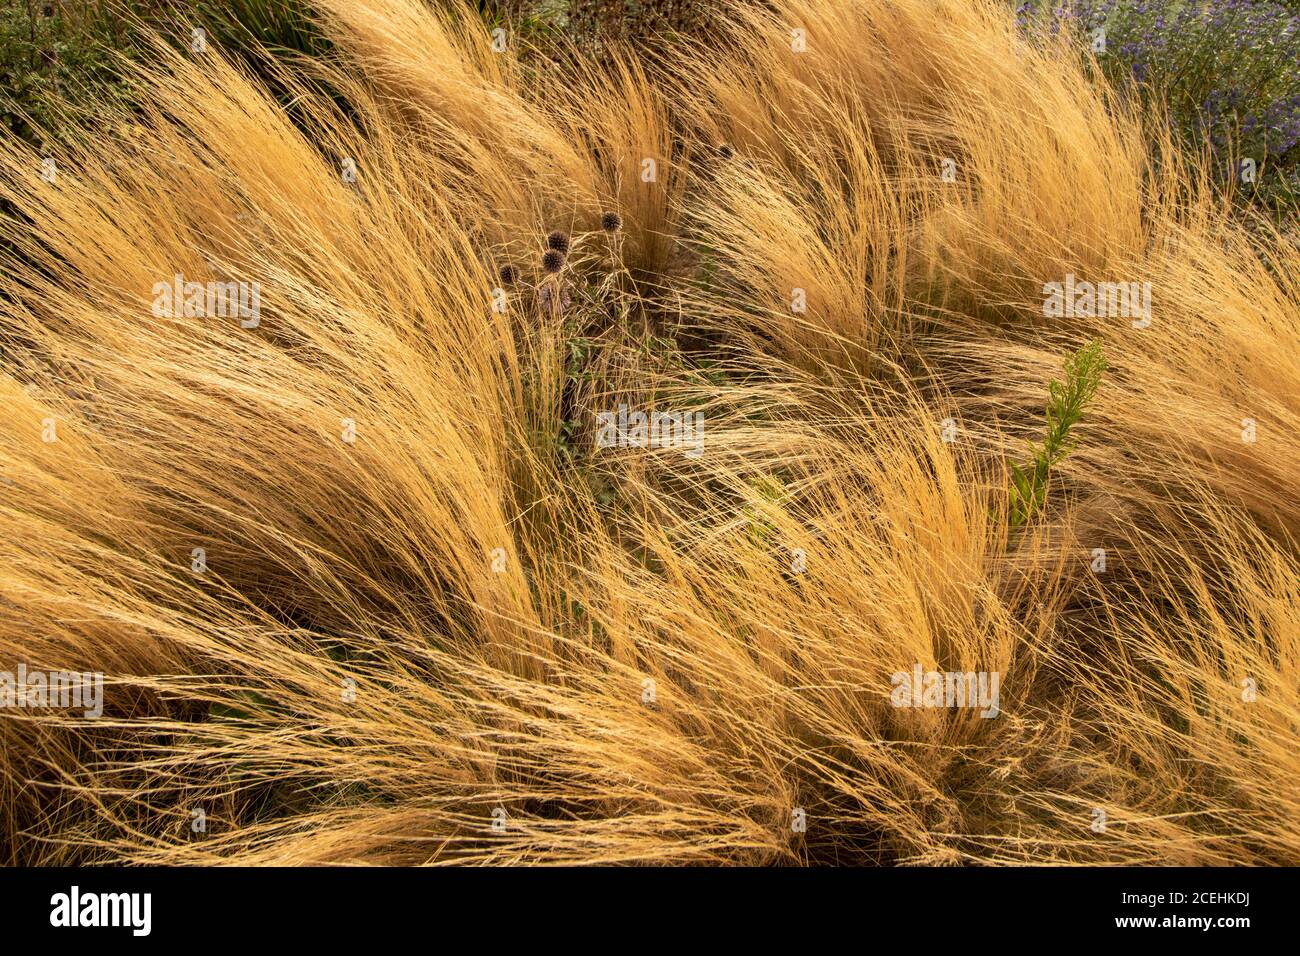 Stipa Tenuissima, ornamental Mexican feathergrass forming abstract patterns in the wind Stock Photo